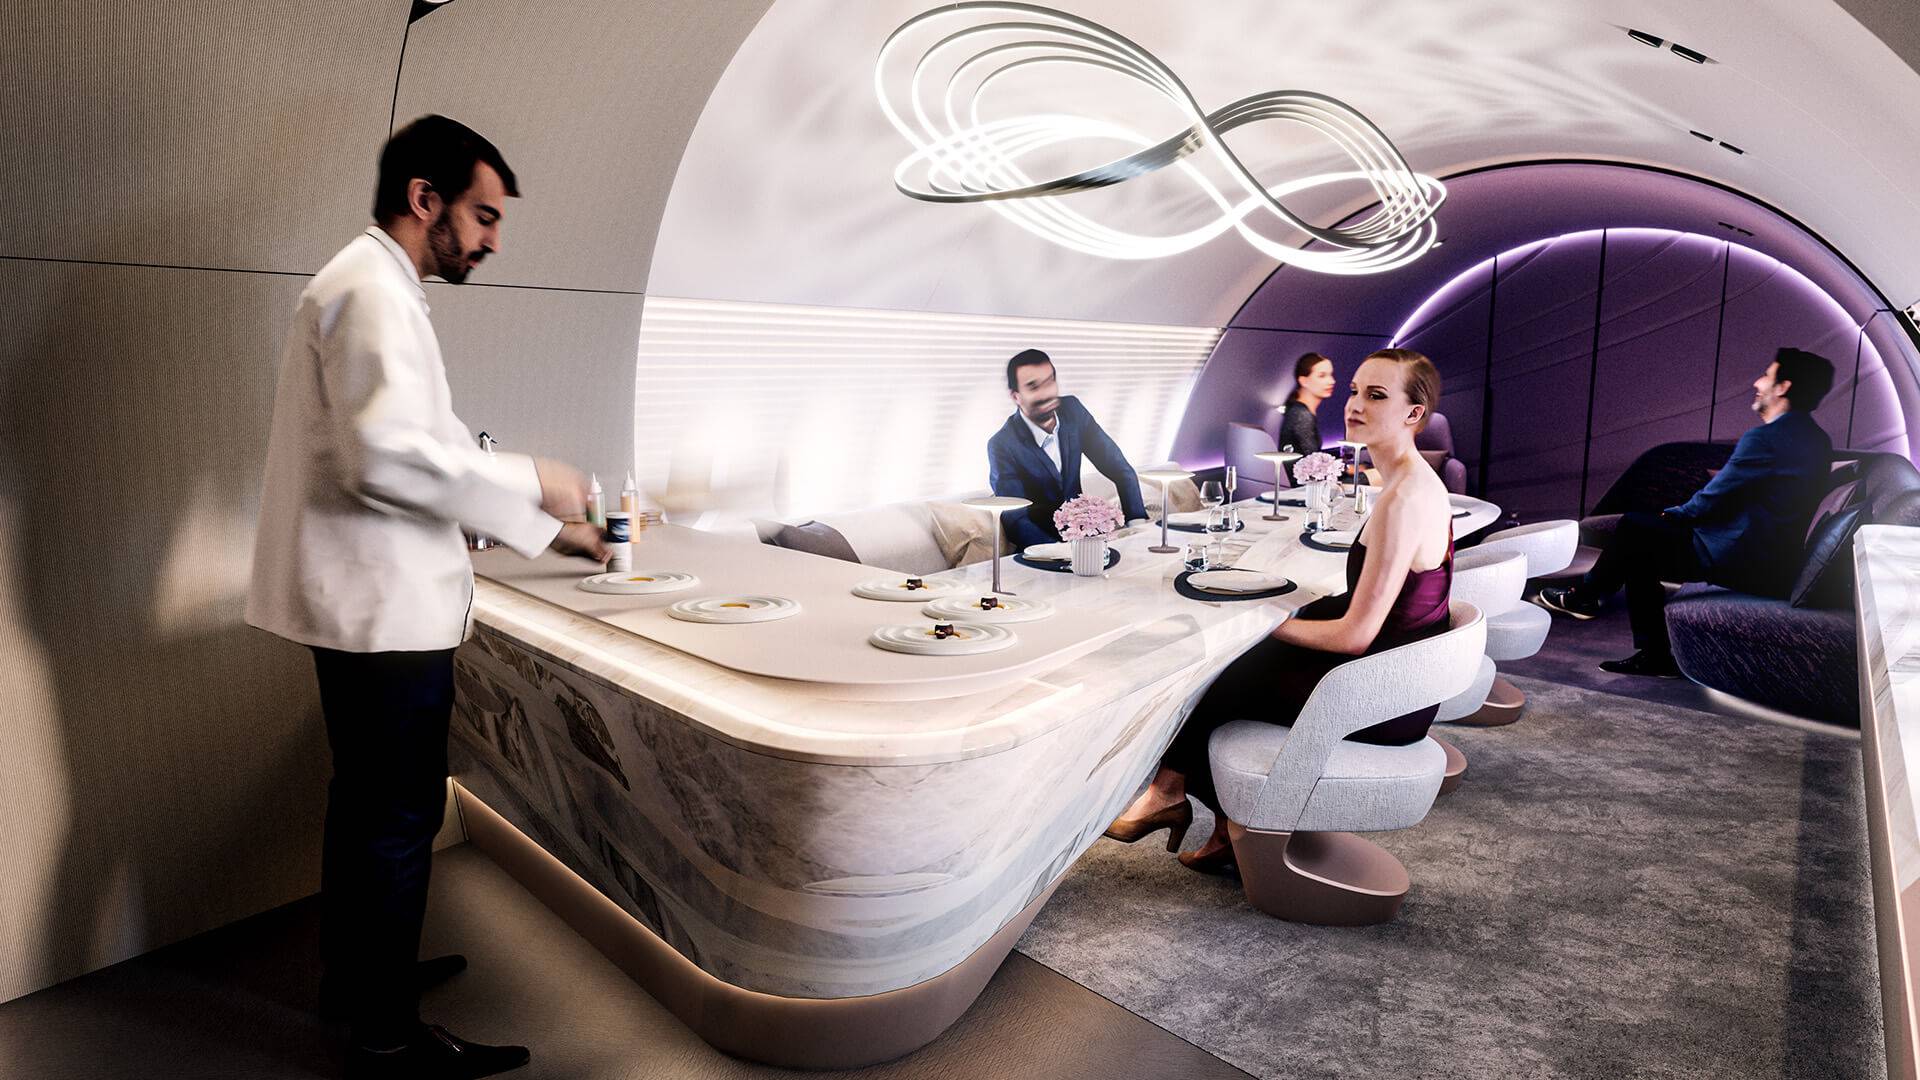 Onboard aircraft private dining experience